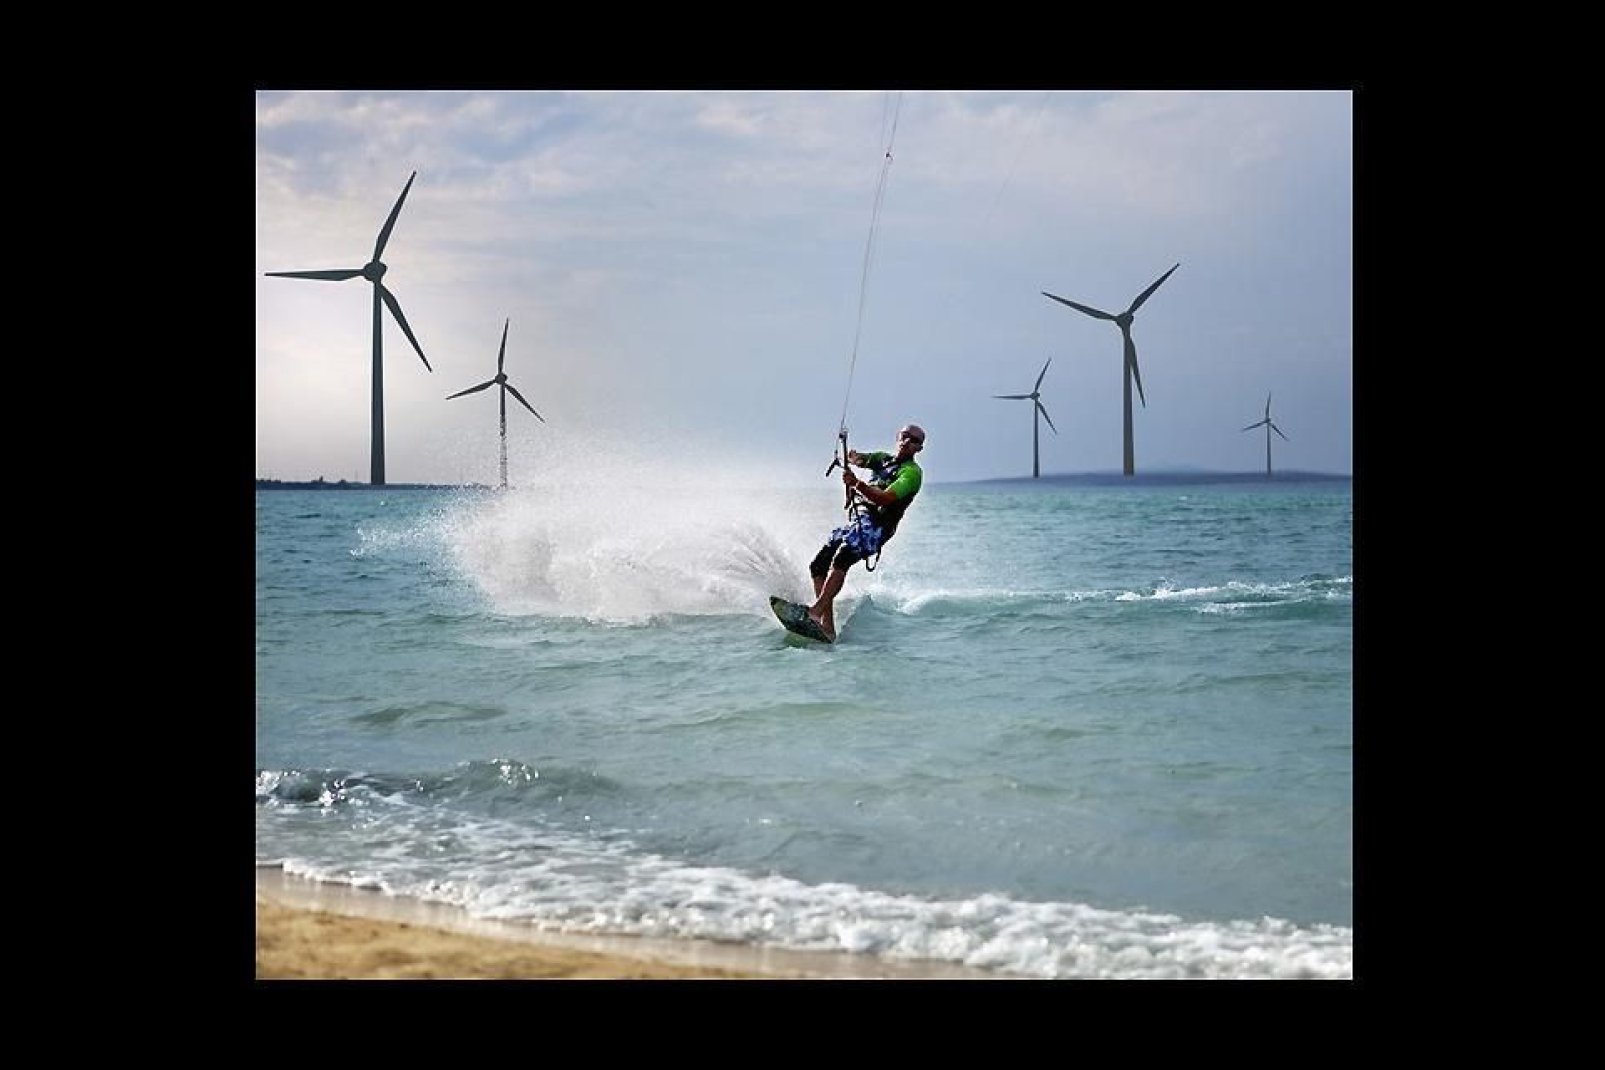 The Zadar coastline offers great watersports, here in front of some wind turbines